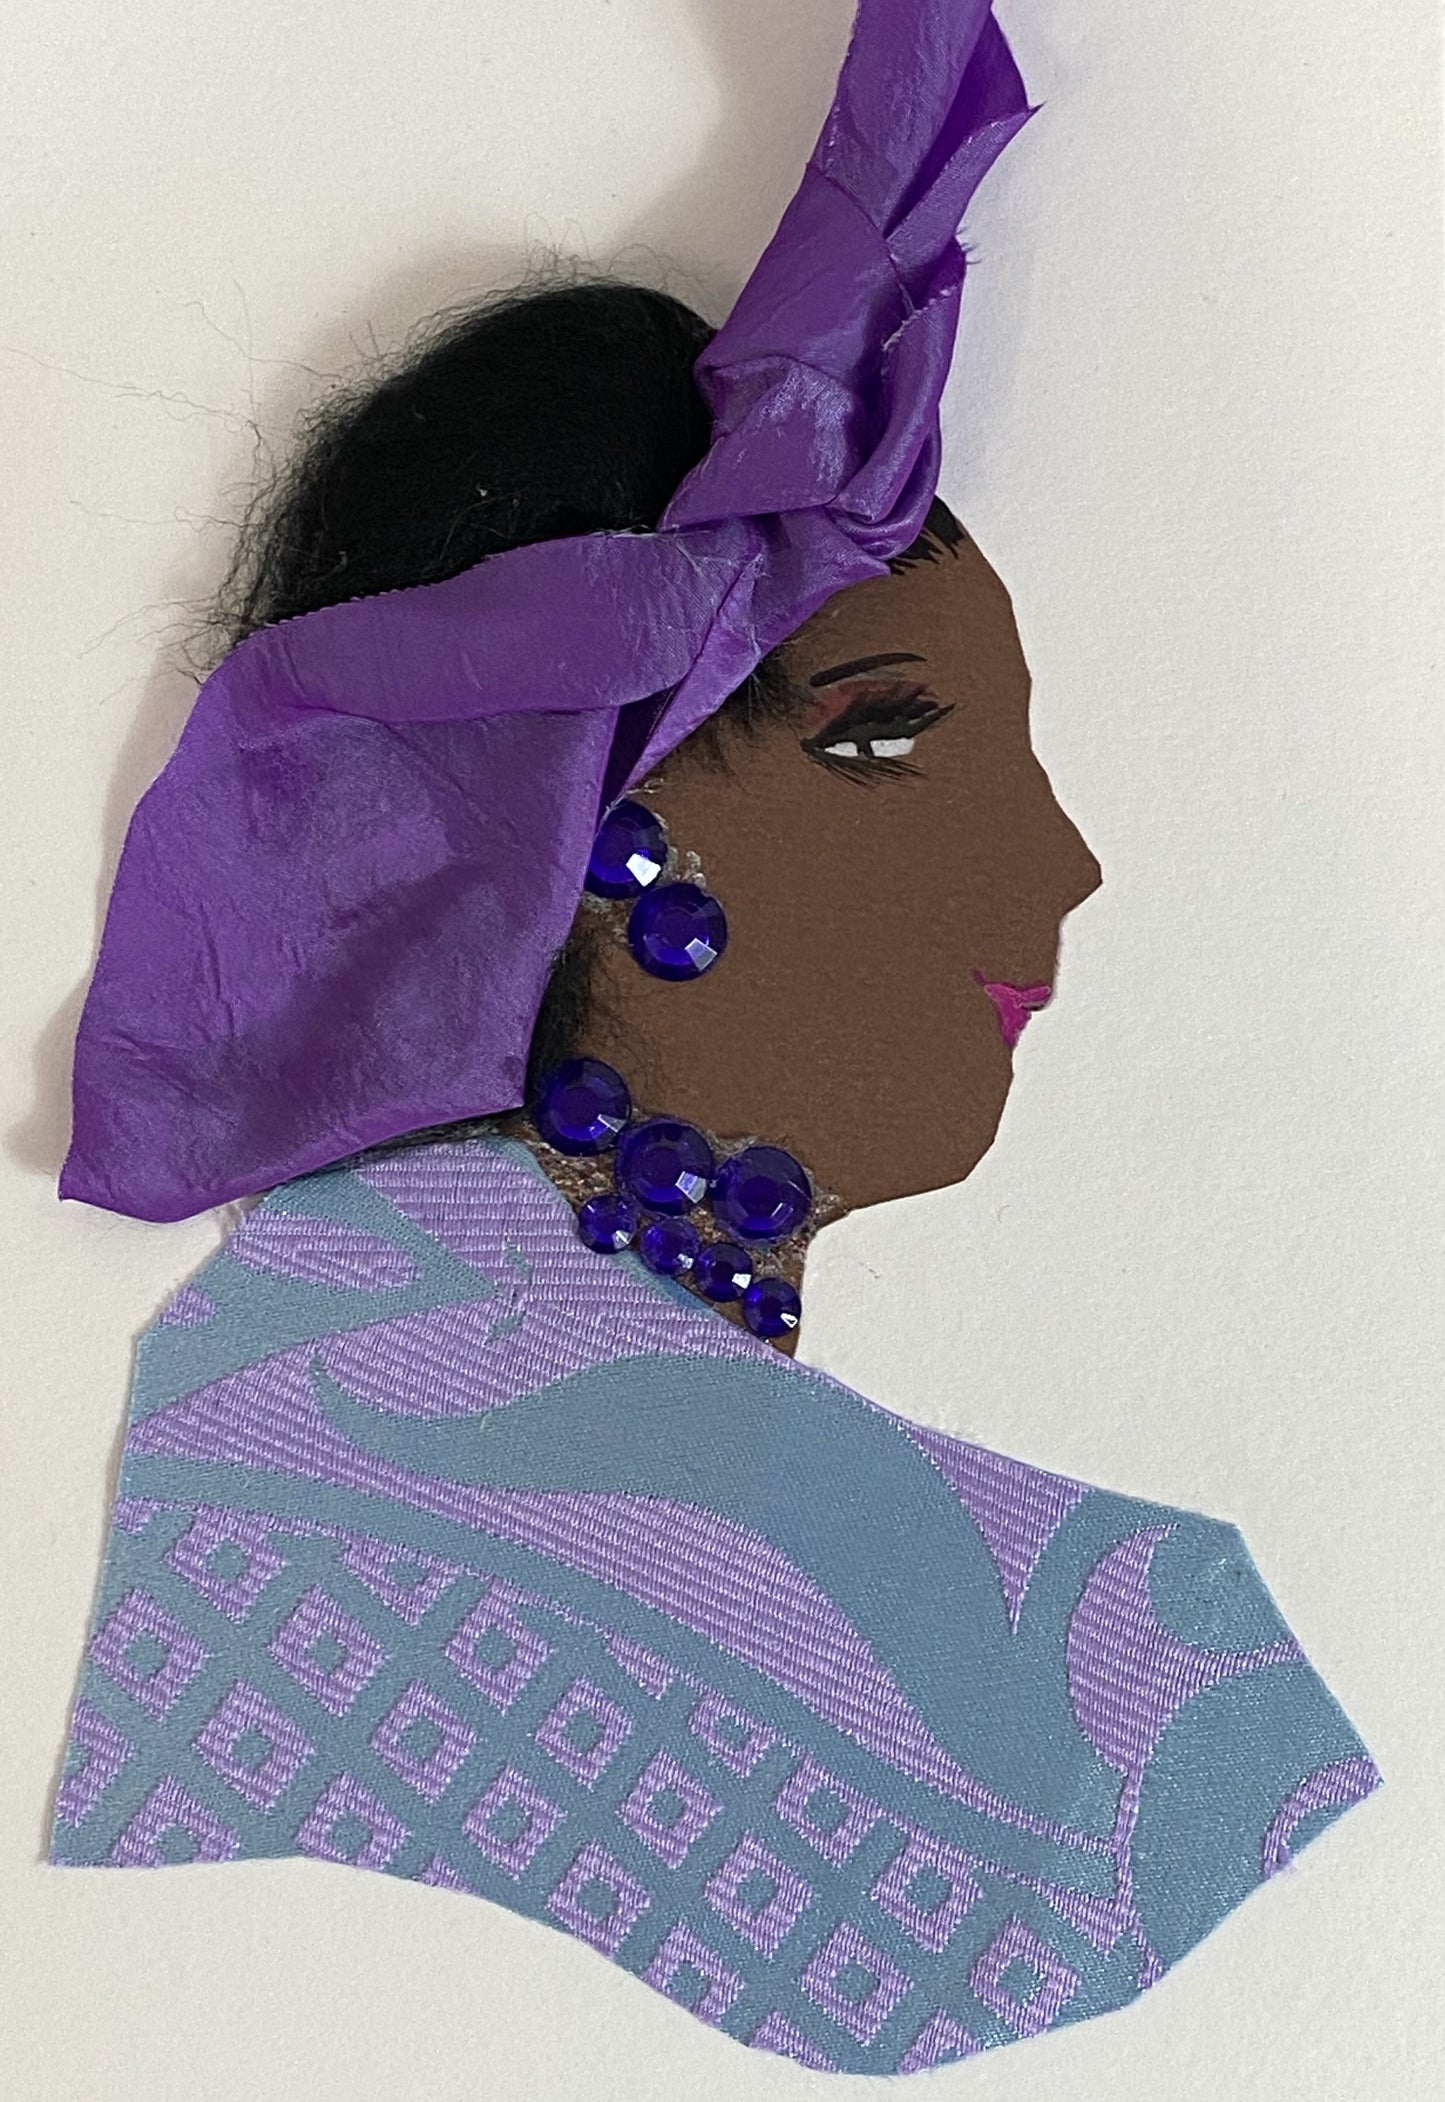 This card is called Peju. She wears a patterned blouse which is light blue and lavender, and a purple headscarf in her black hair. 